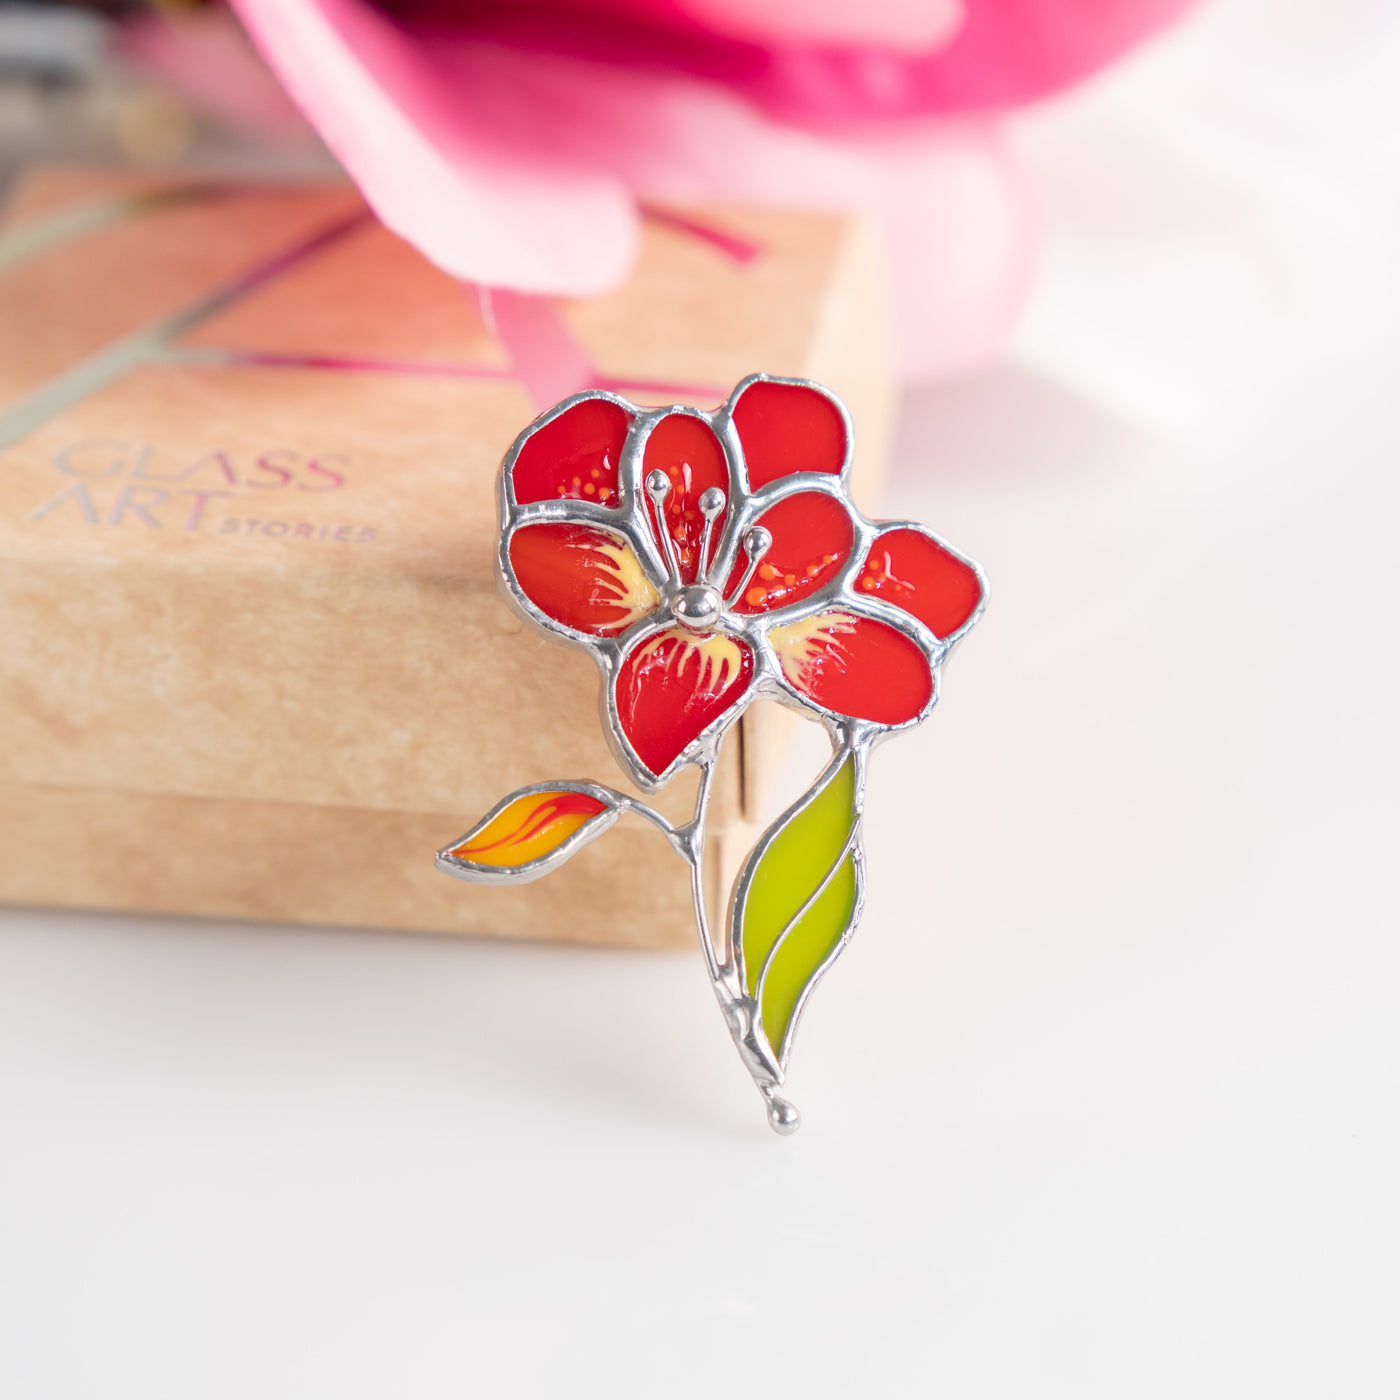 Stained glass red aster flower pin